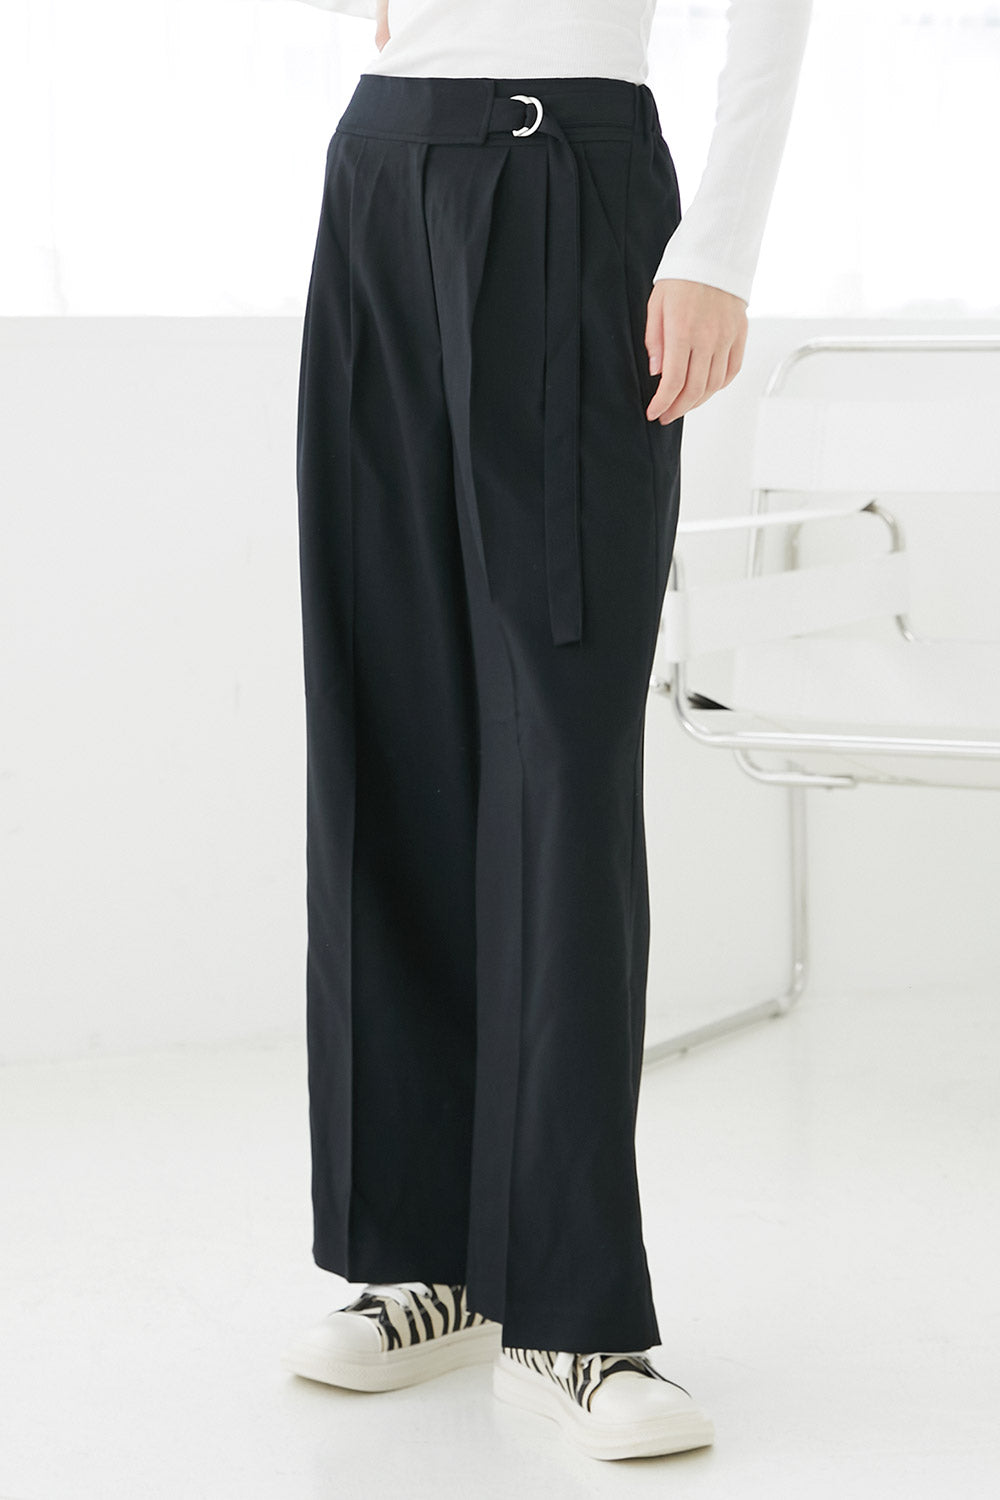 storets.com Angelina Pants with Front Buckle